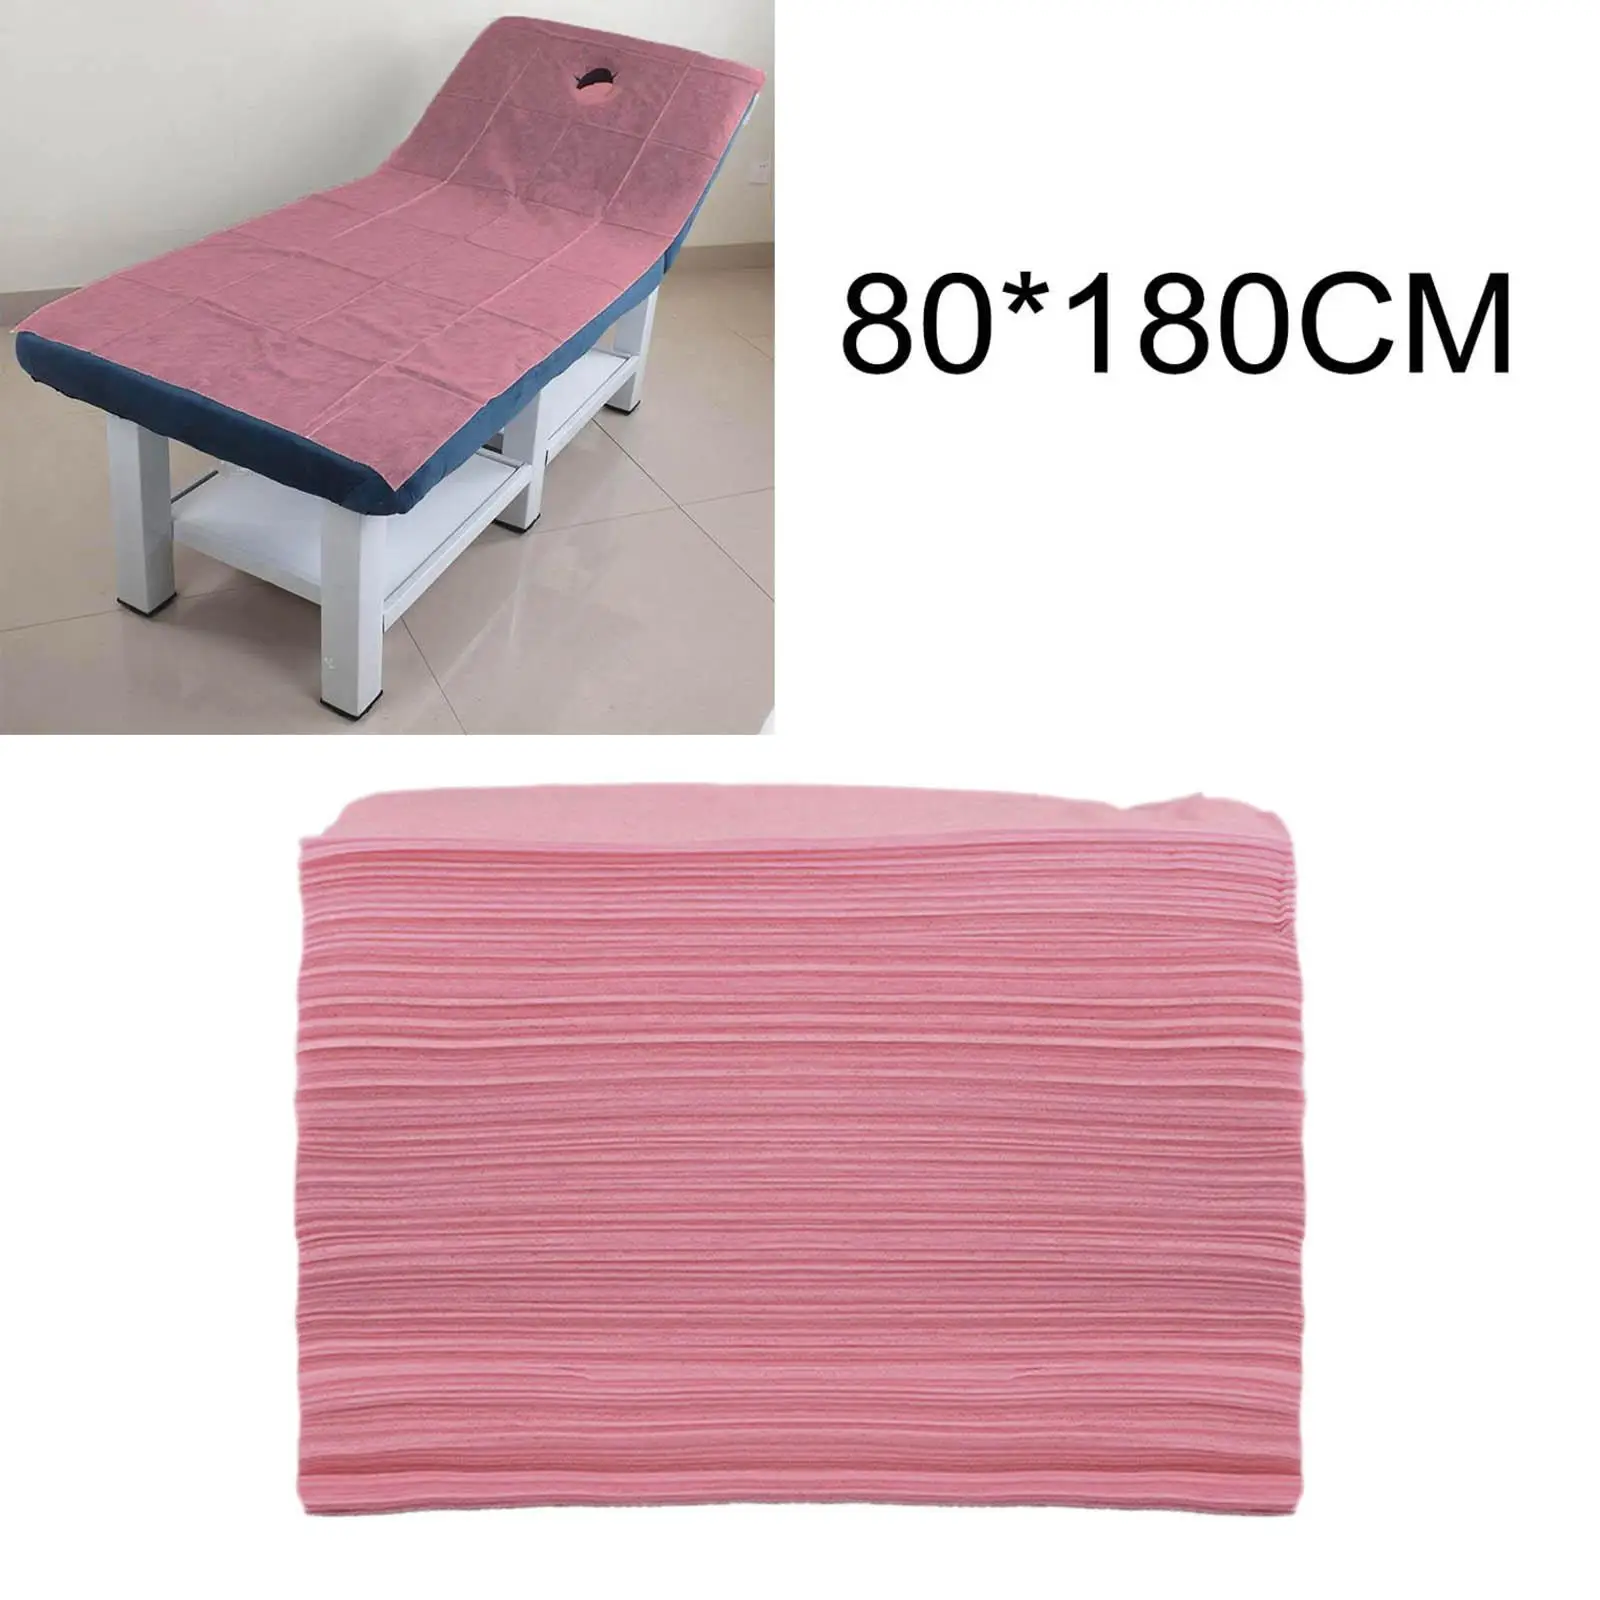 100x Disposable Bed Sheet Thicken 80x180cm Soft Massage Bed Cover for Beauty Salon SPA Travel Hotel Stretcher Table Cover